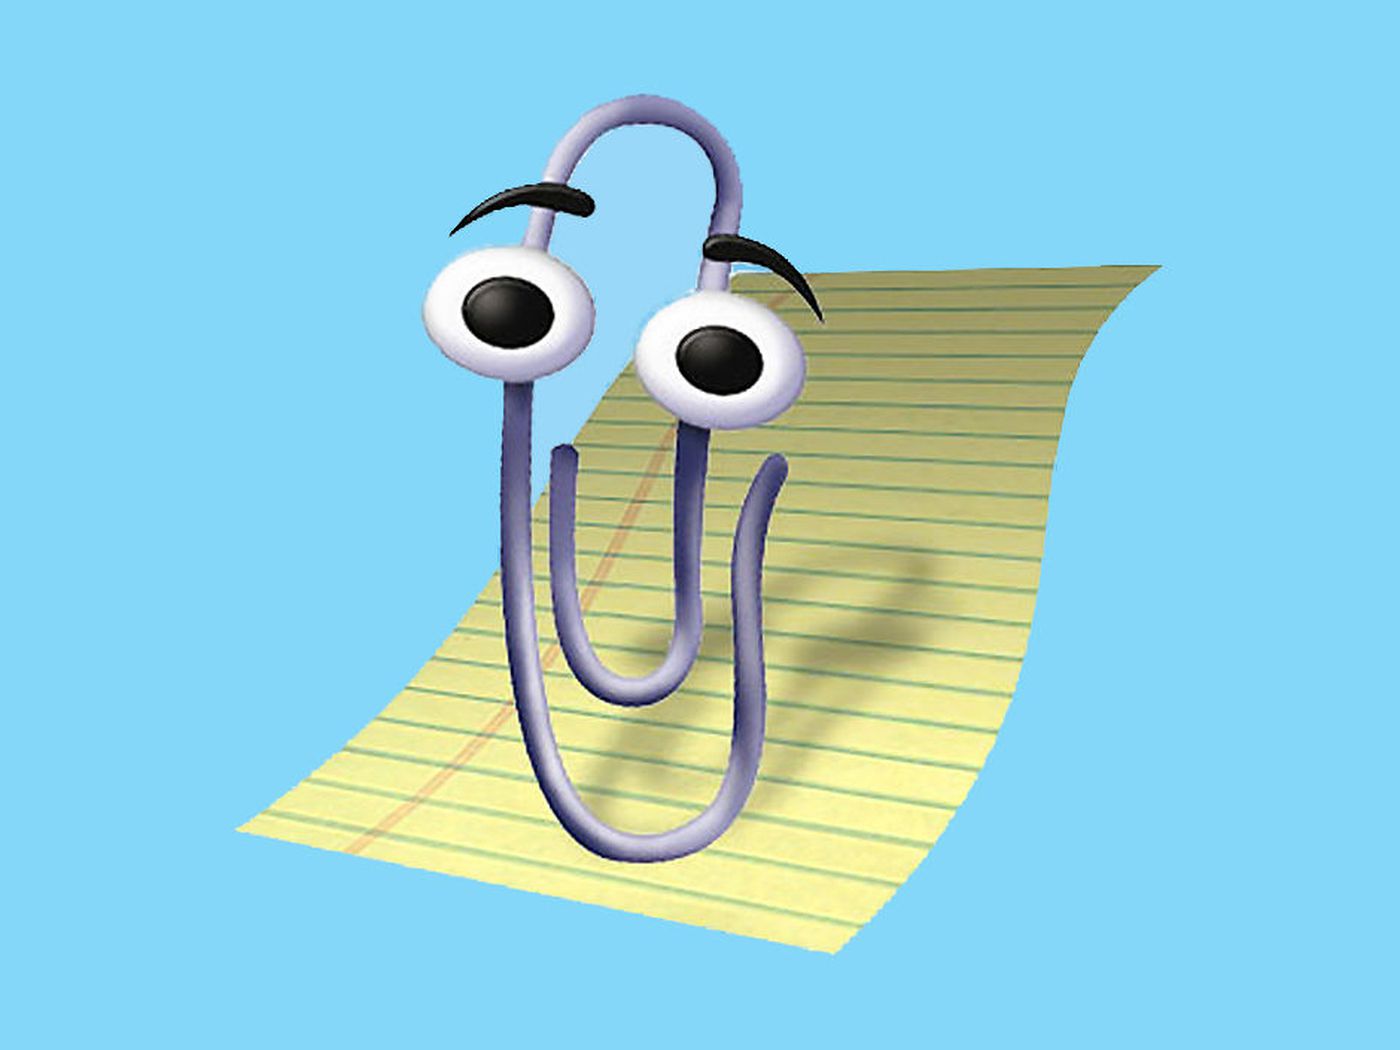 Microsoft threatens to resurrect Clippy as an Office emoji - The Verge